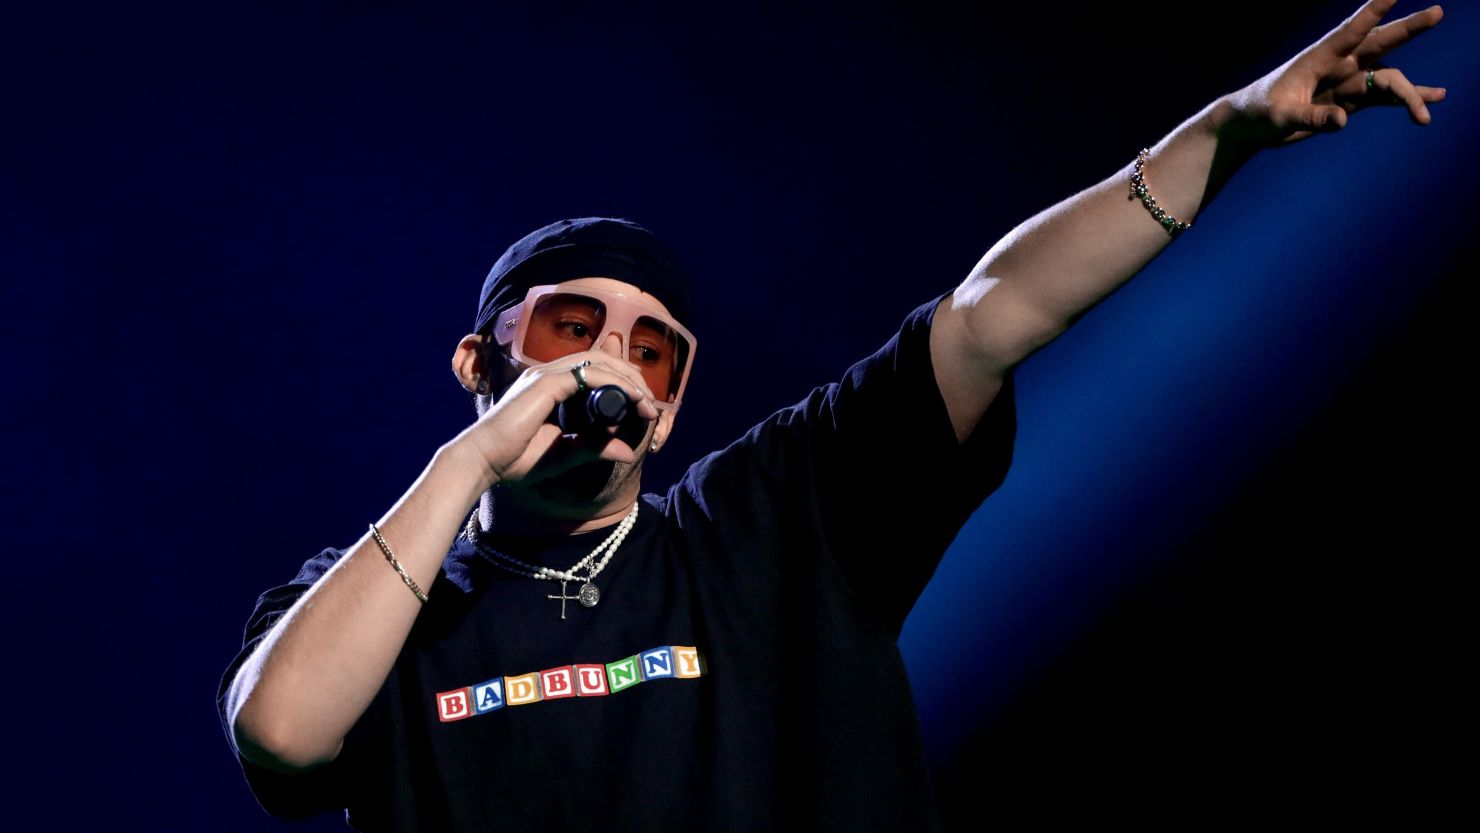 Bad Bunny performs onstage during the 2020 Spotify Awards at the Auditorio Nacional on March 05, 2020 in Mexico City, Mexico.